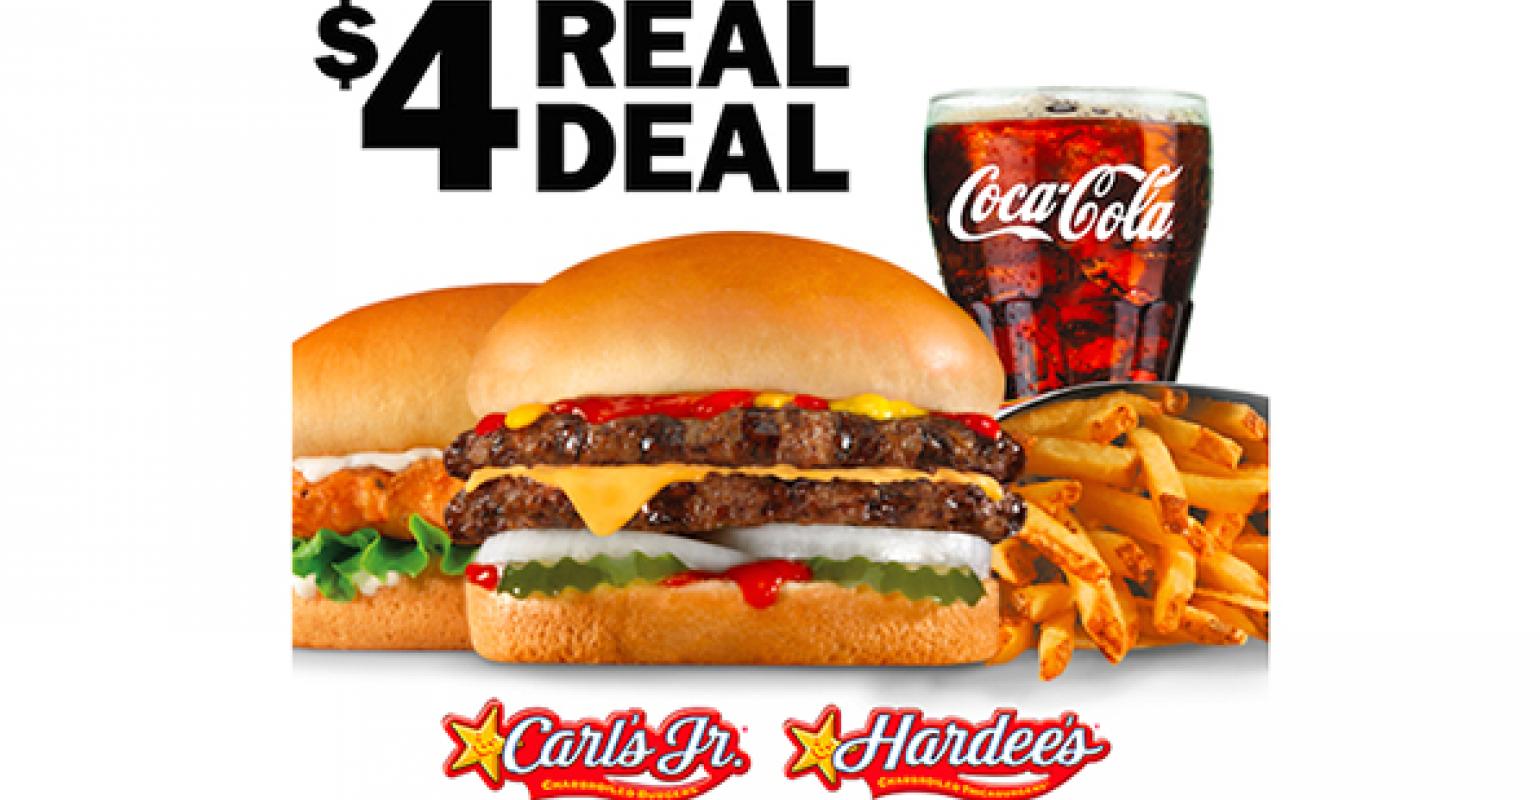 Discounted fast food deals